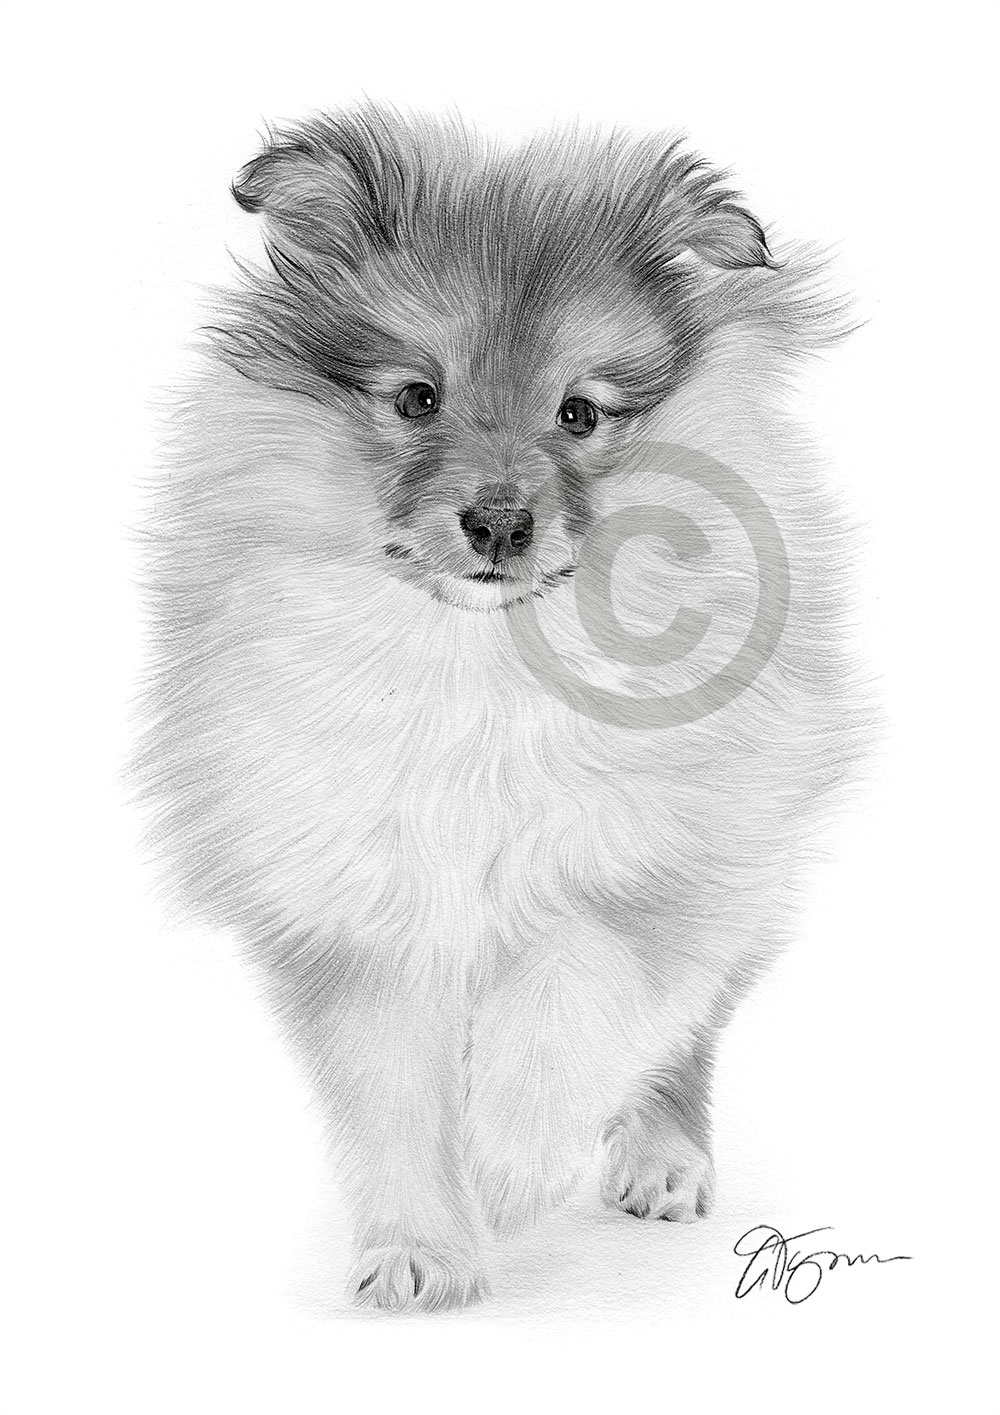 Pencil drawing of a Sheltie puppy by artist Gary Tymon